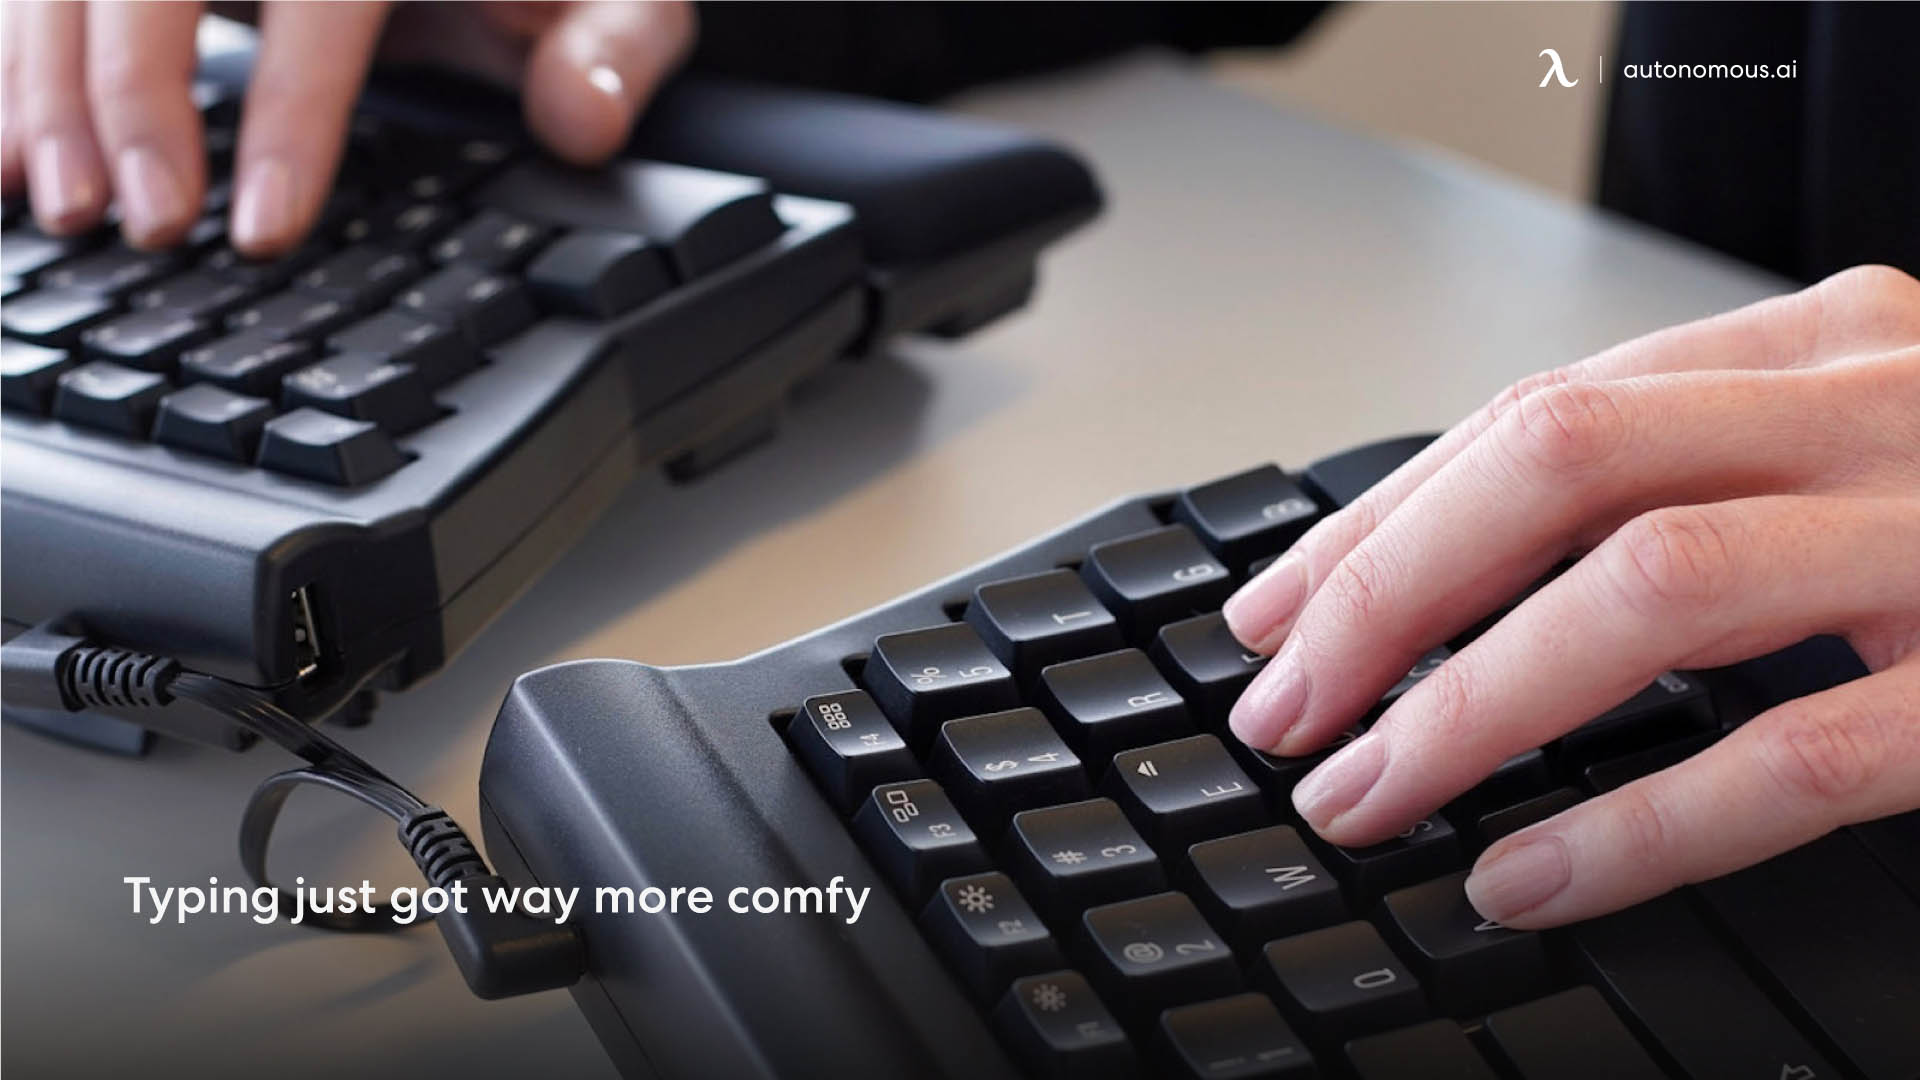 Recommendations to prevent wrist pain from typing